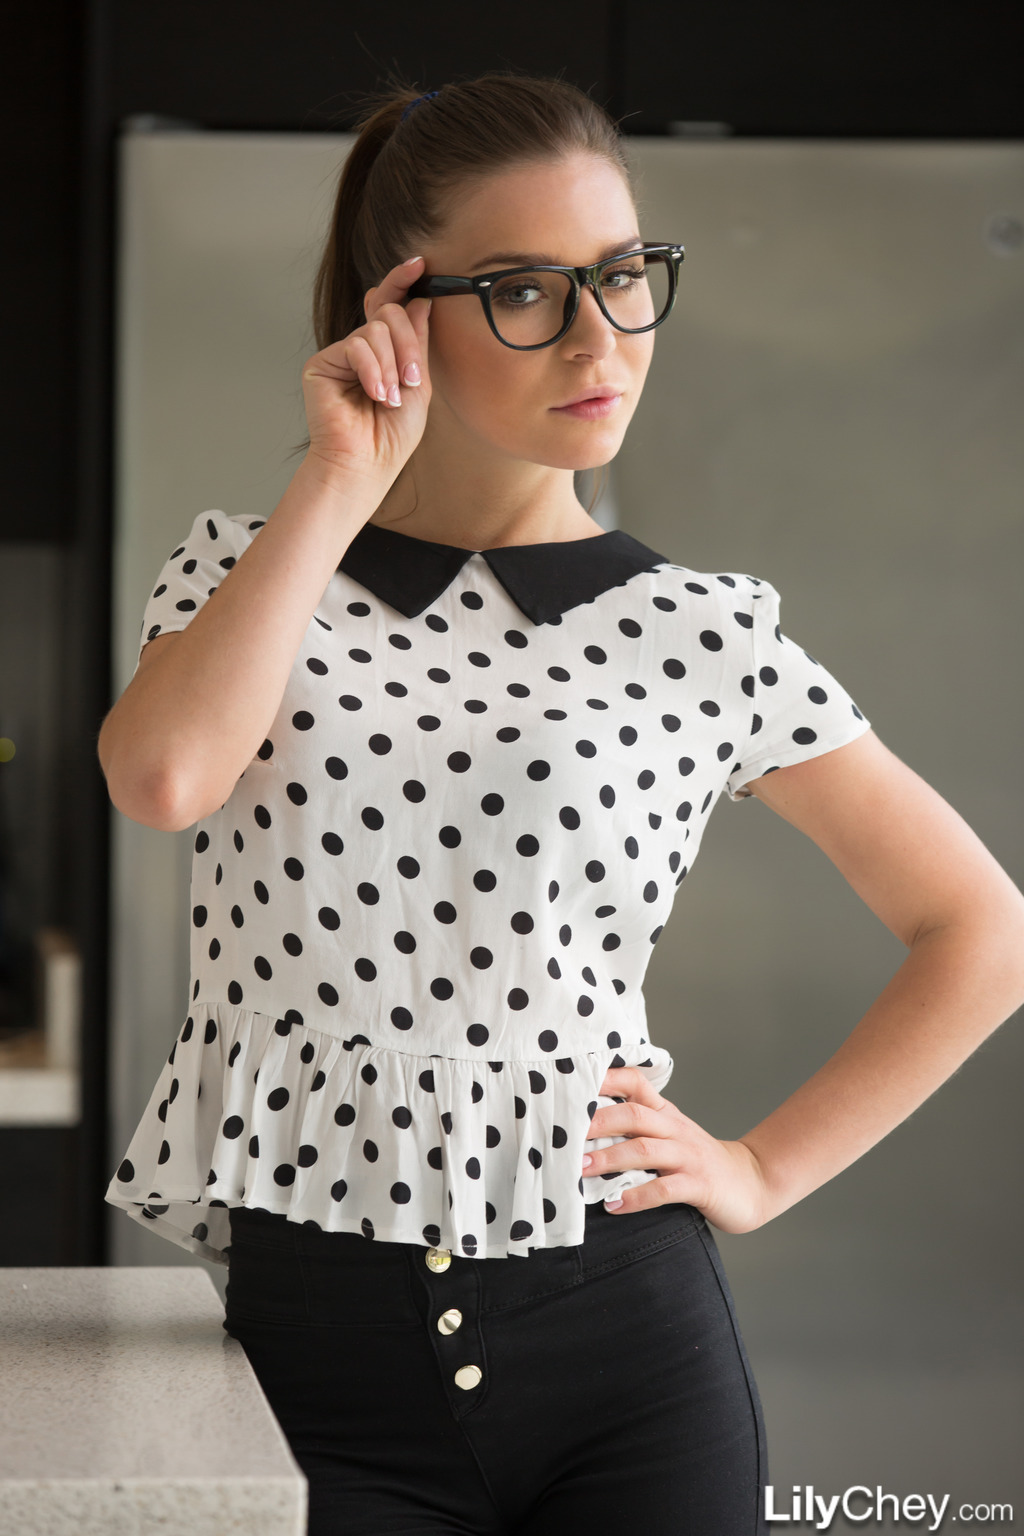 Lily Chey In Polkadots N Glasses 02